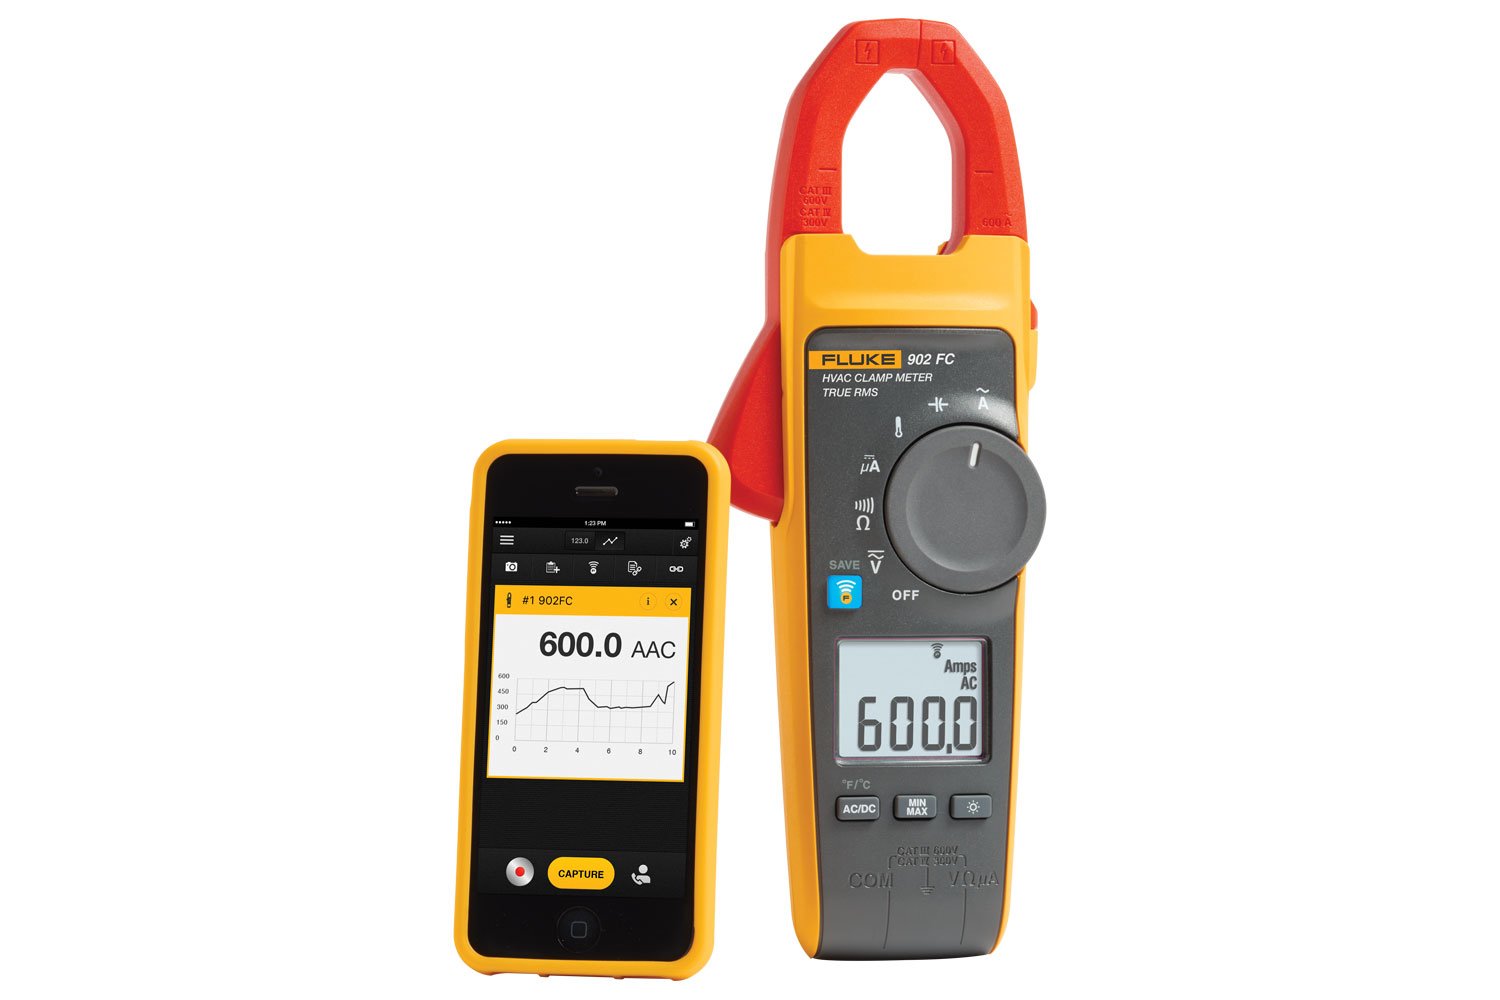 WXQ-XQ SSEYL TM-1017 400A True-RMS AC Power Clamp Meter Phase Rotation Digital Clamp Meter 